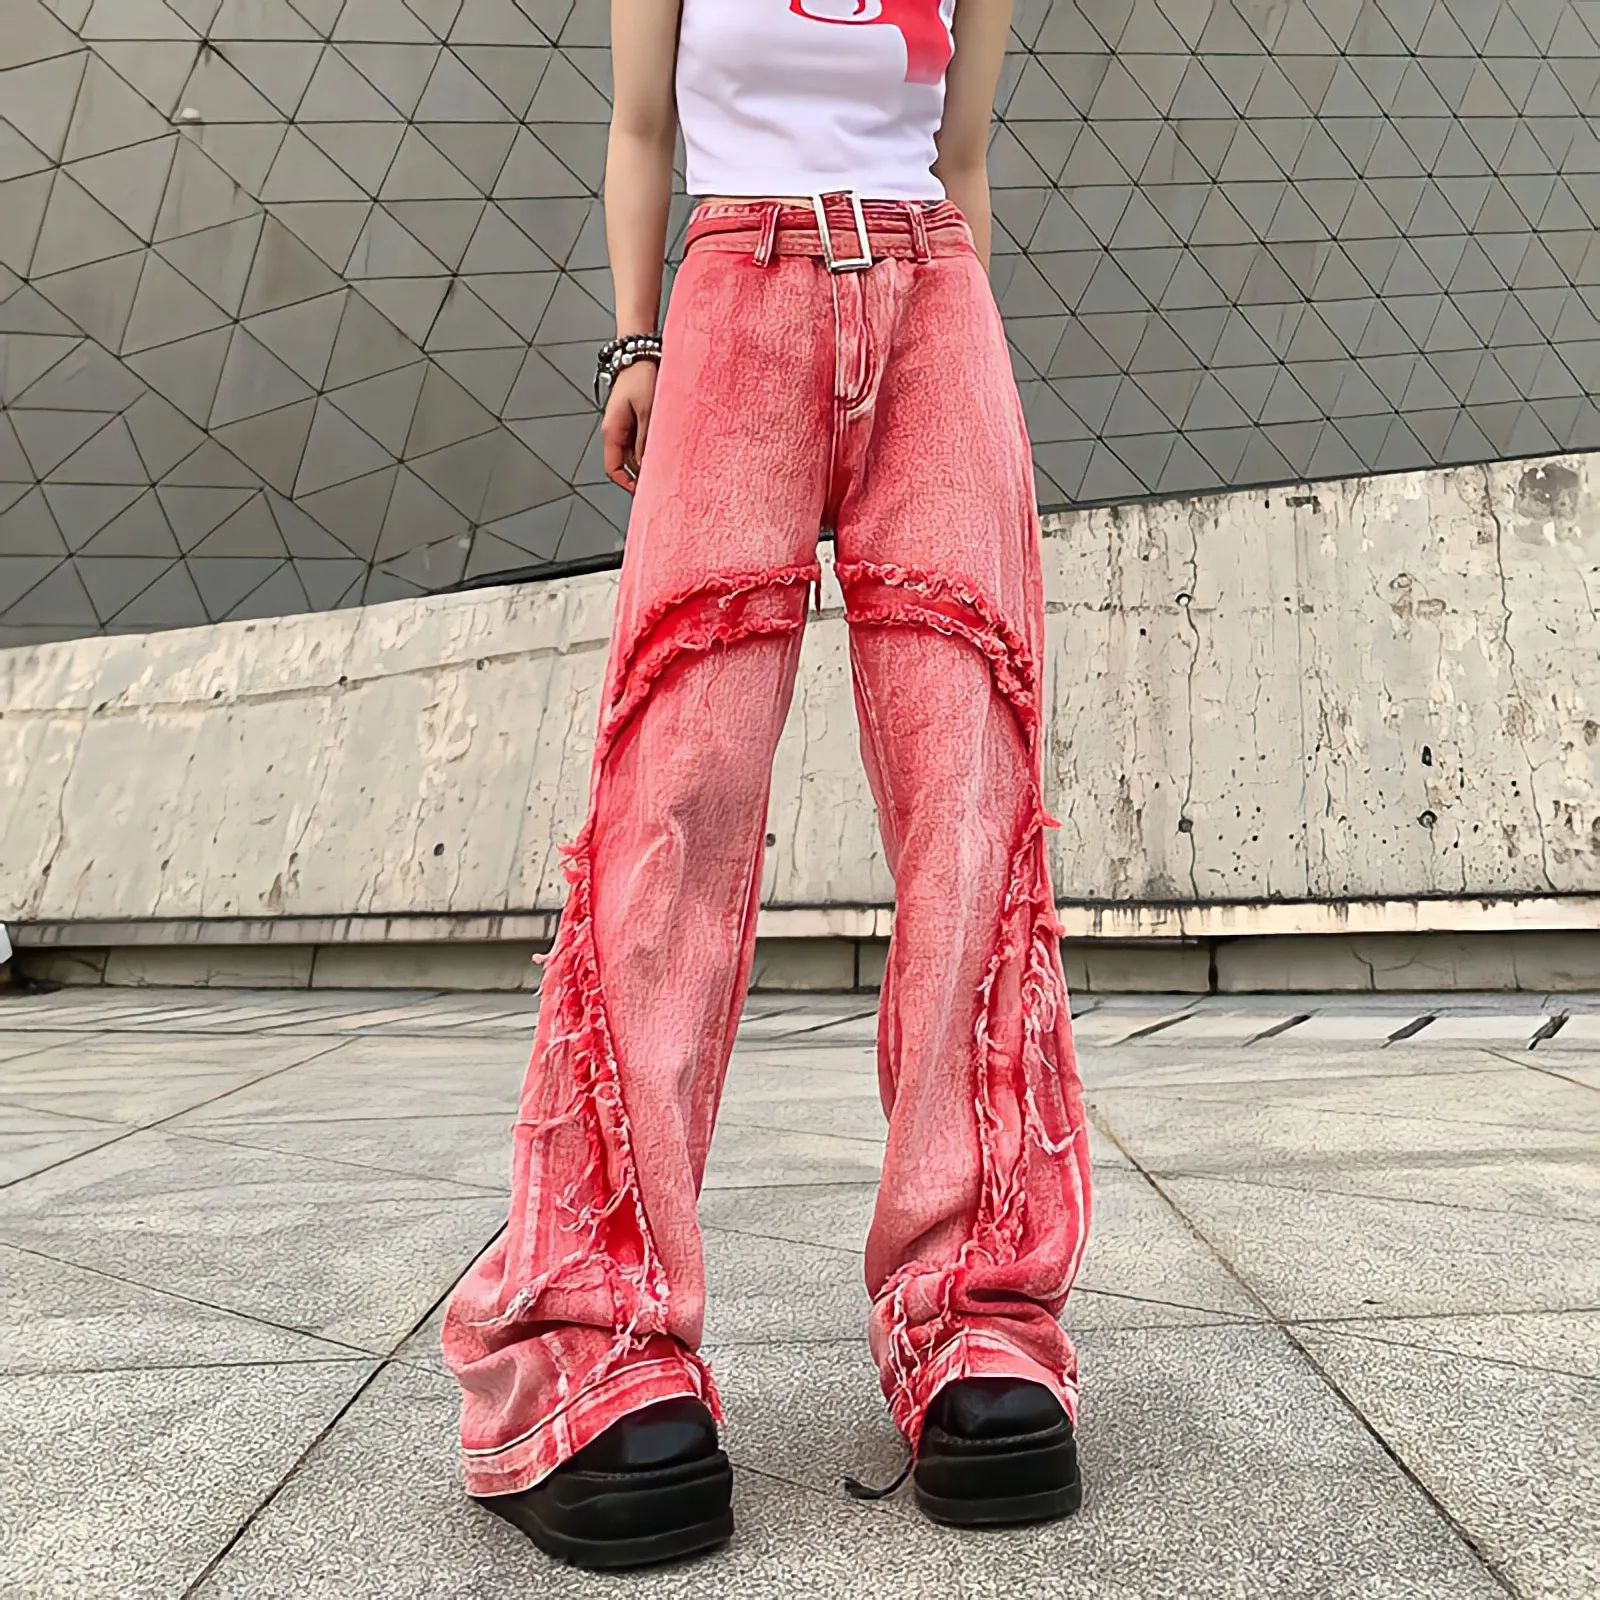 American Style Vintage Washed Raw Edge Fashion High Waist Casual Trousers Wide Leg Jeans Women Y2k Streetwear Baggy Pink Pants